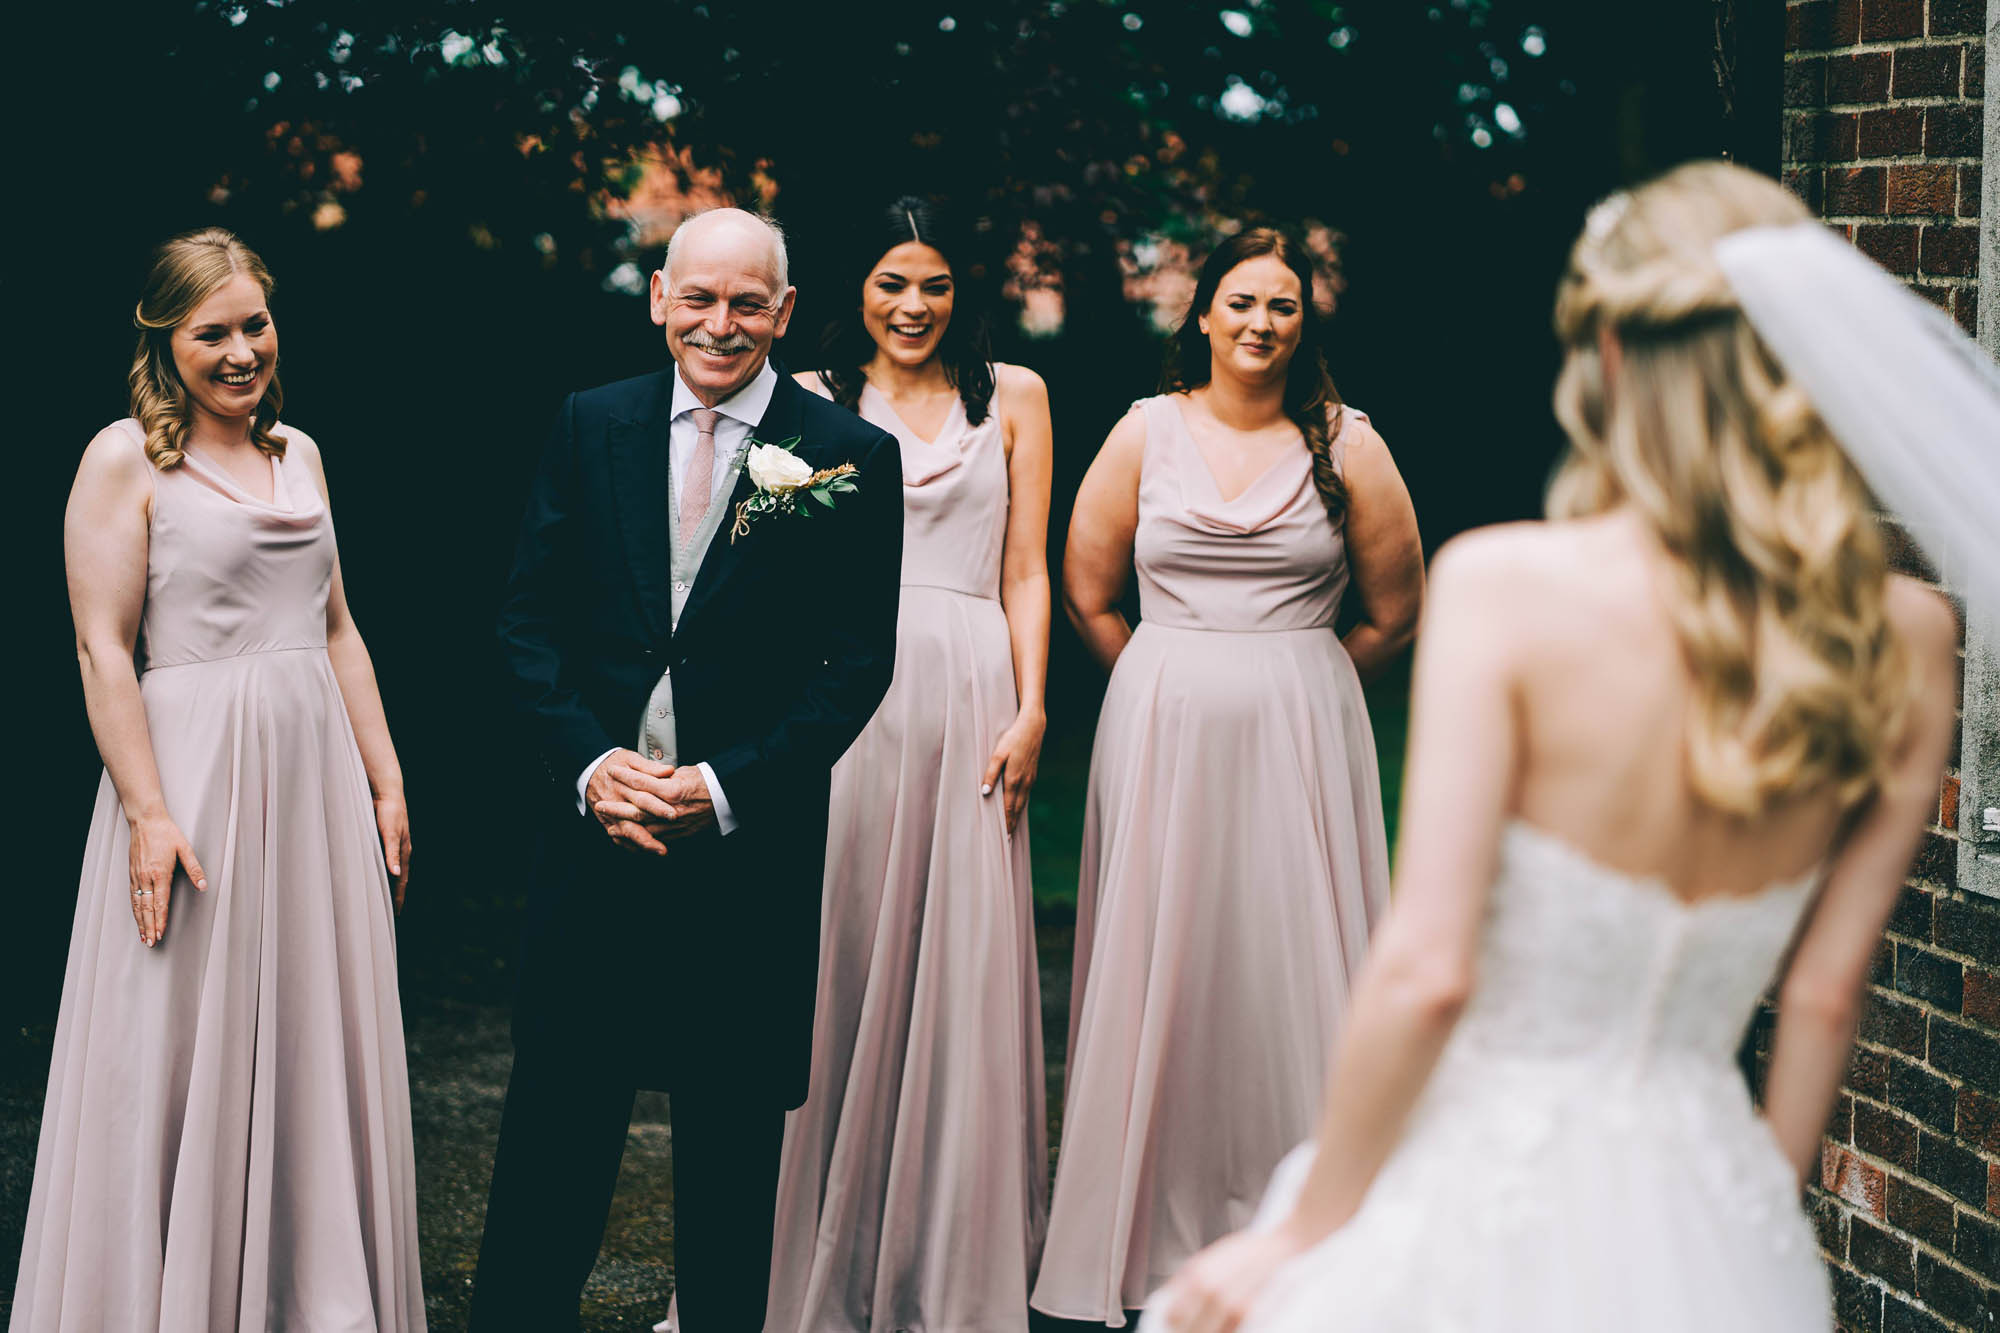 The father of the bride and three bridesmaids see the bride in her dress for the first time. By Abraham Photography